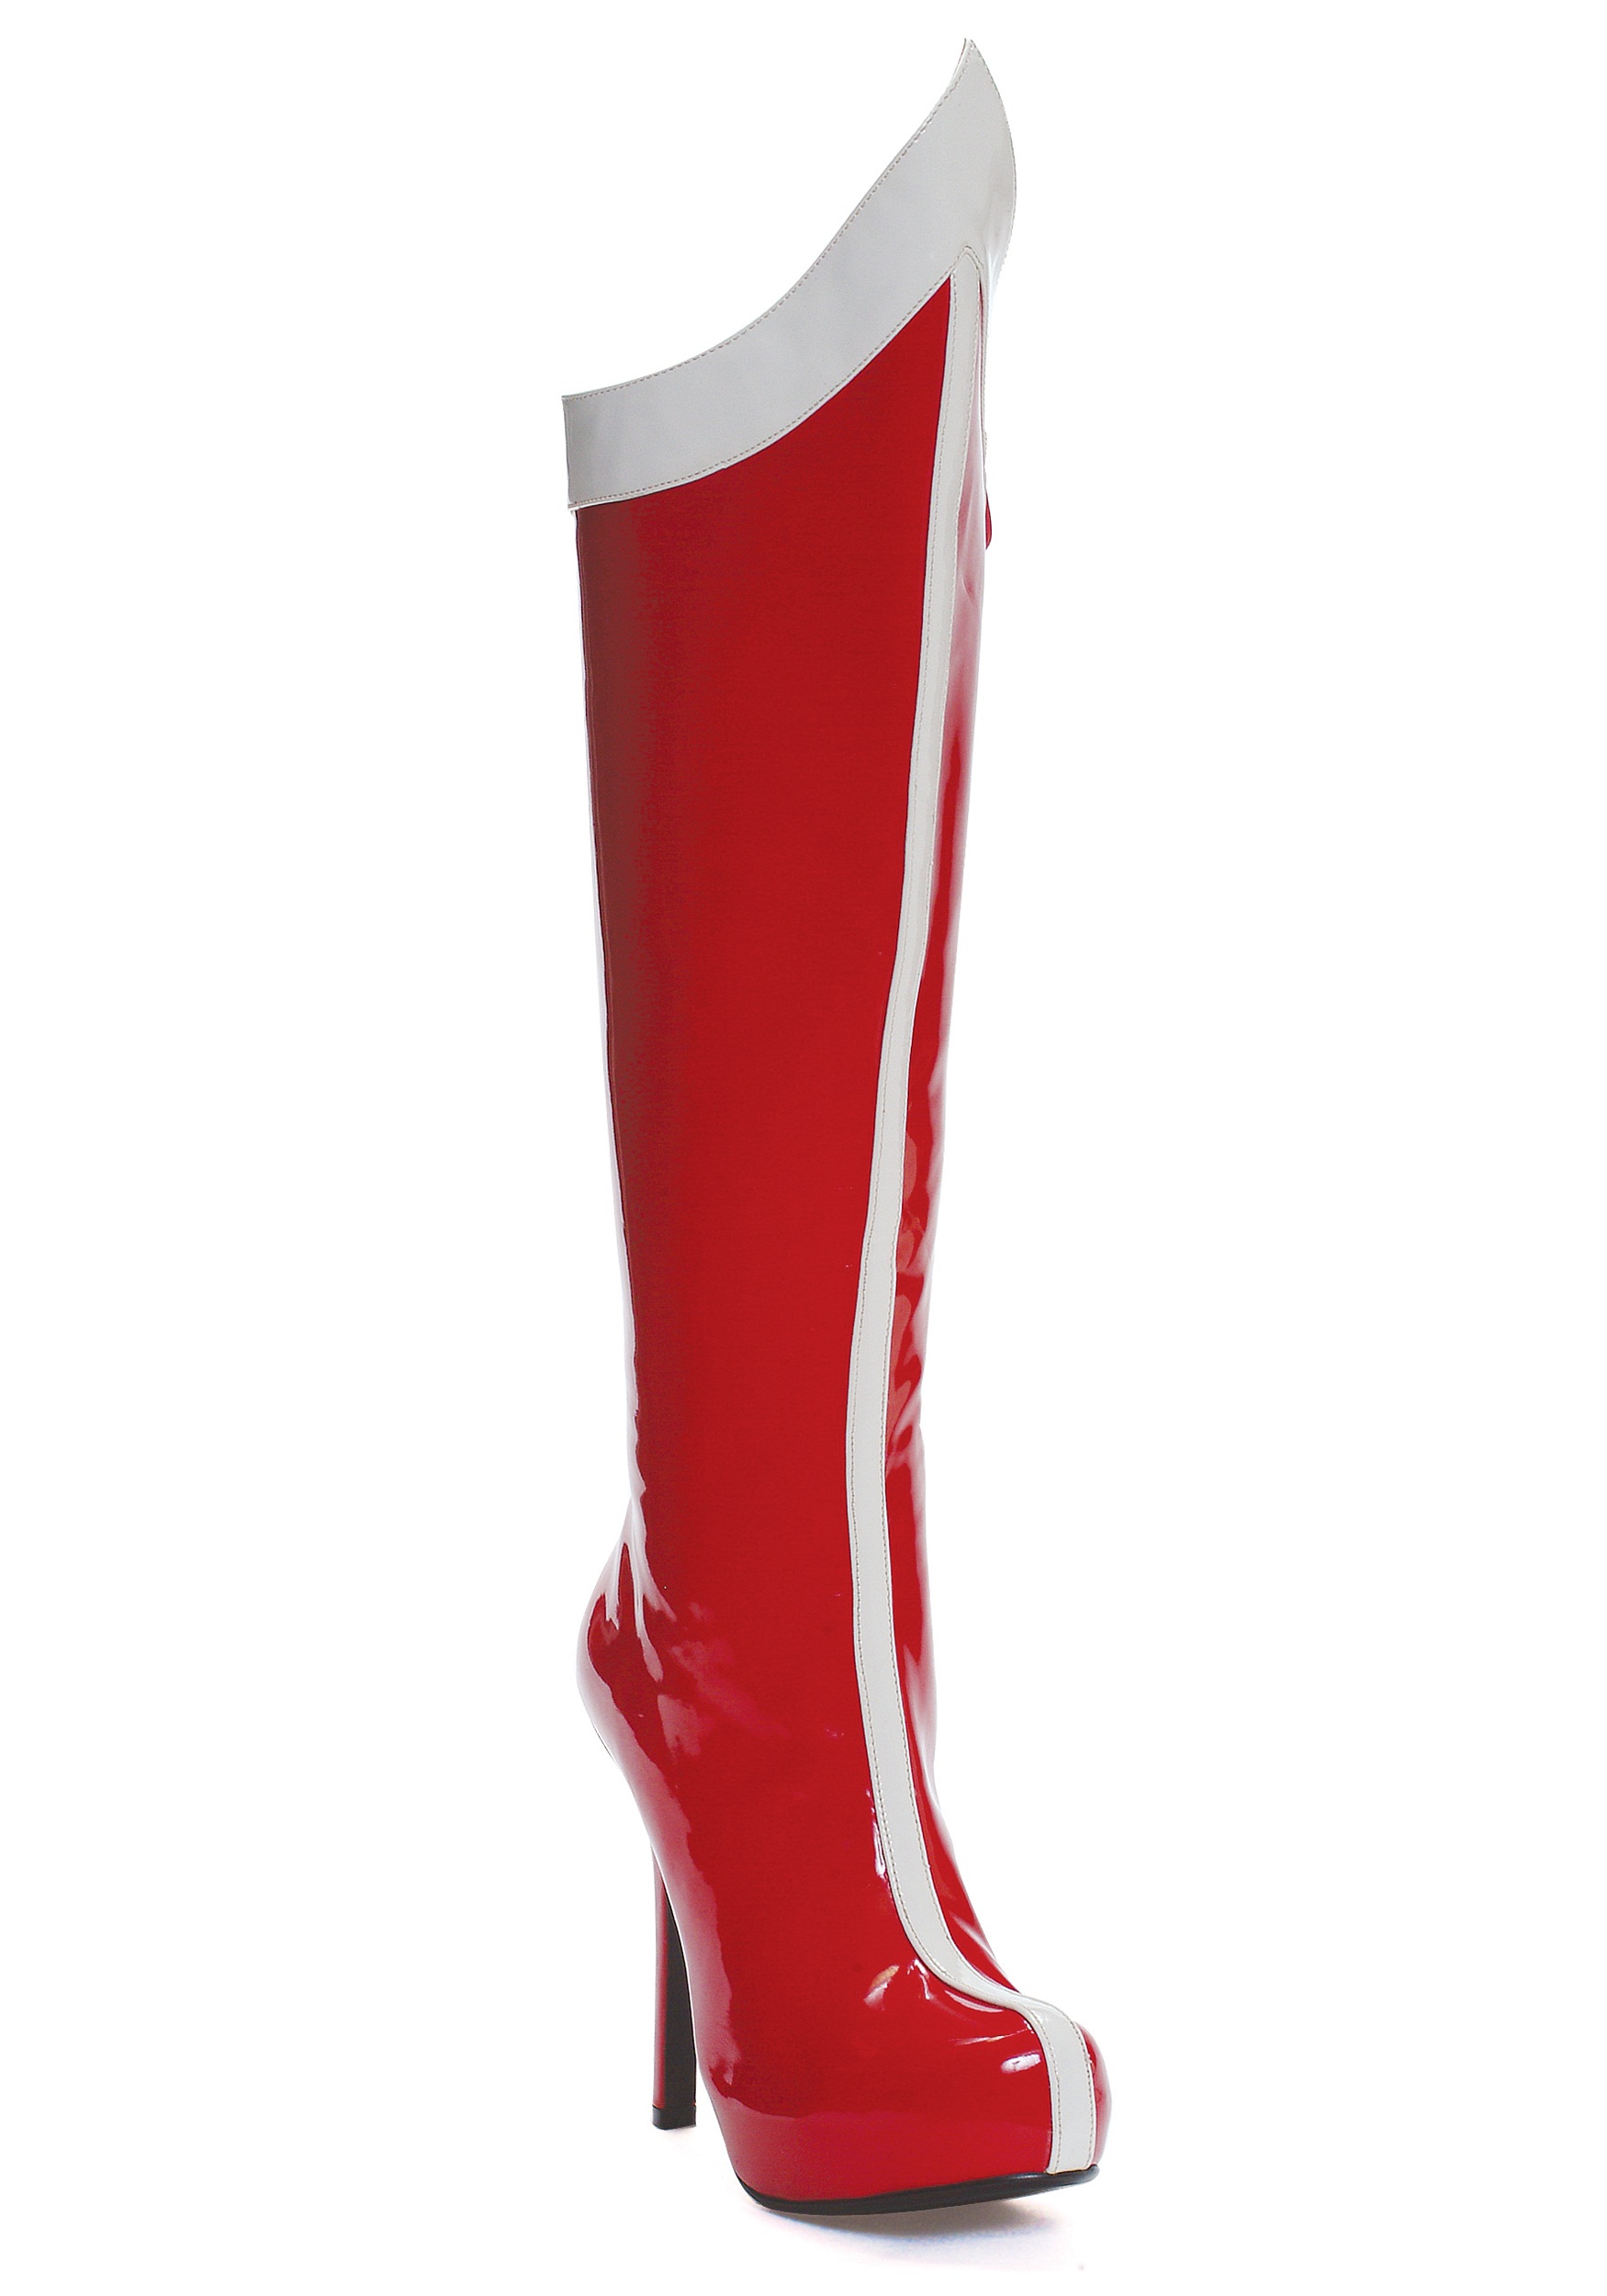 Adult Red and White Superhero Boots